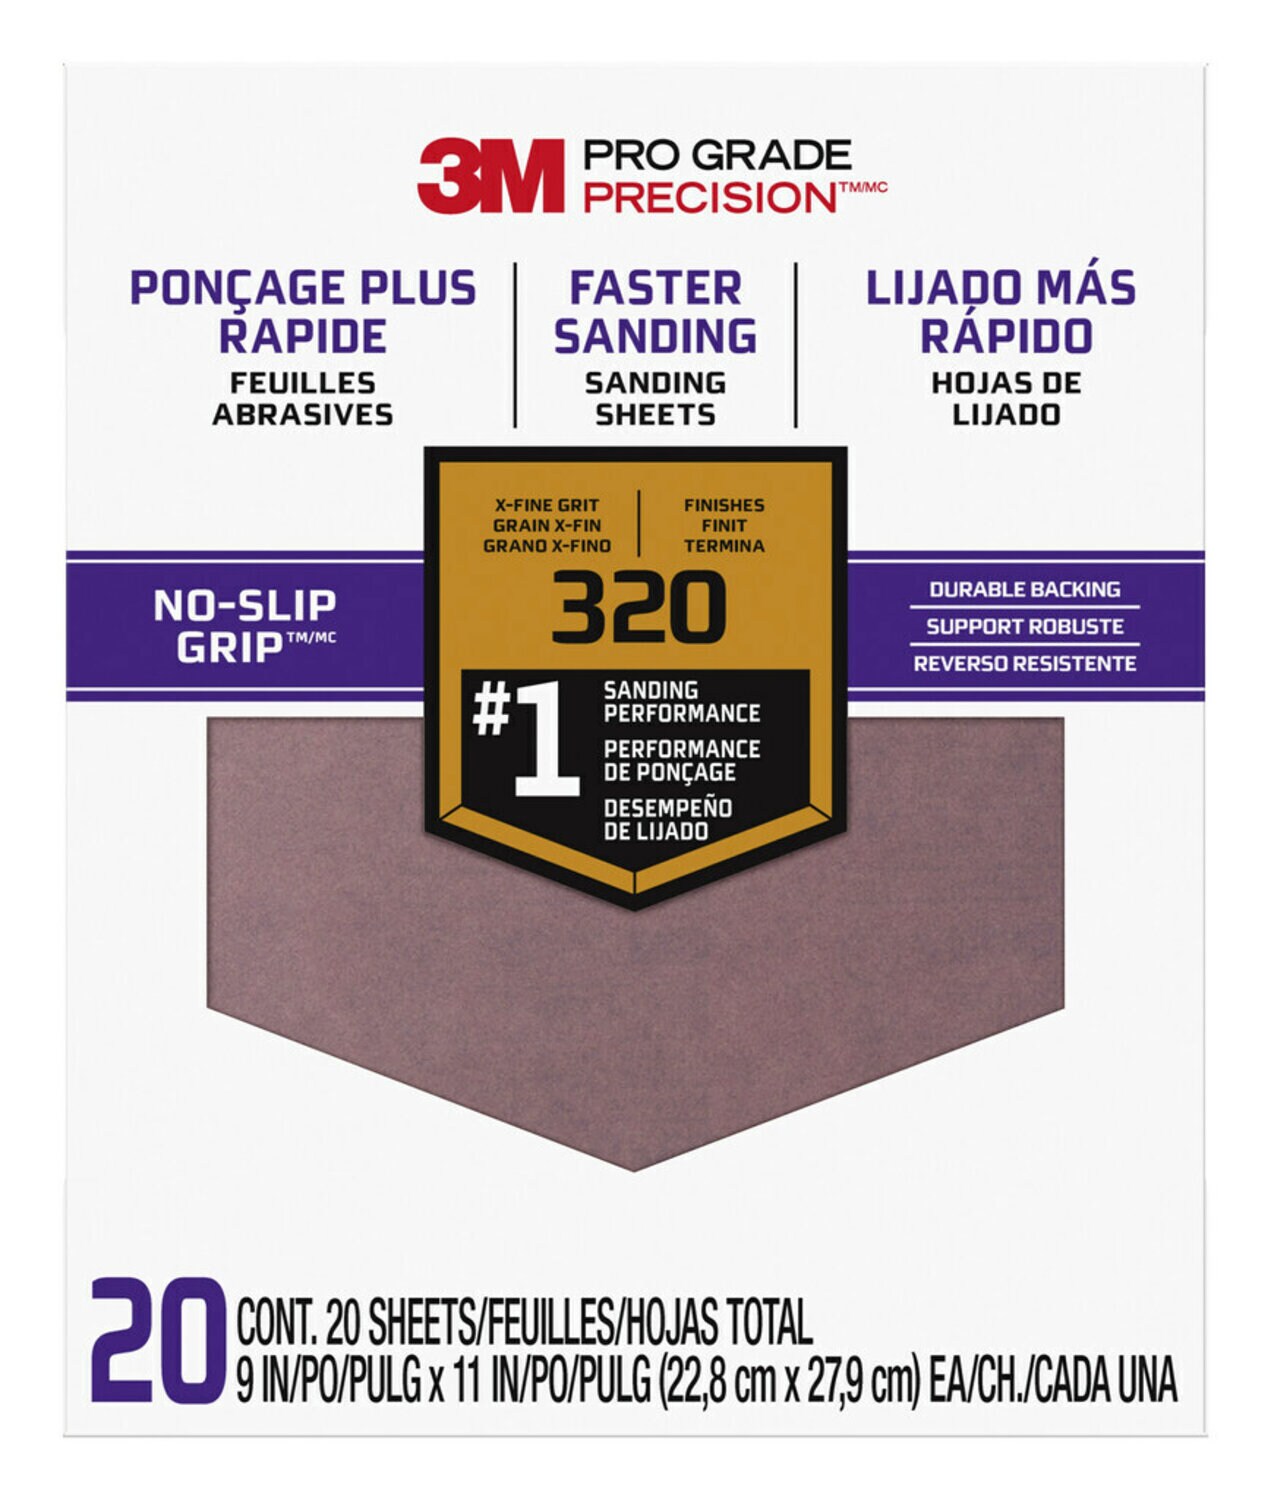 7100149062 - 3M Pro Grade Precision Faster Sanding Sanding Sheets 320 grit Extra
Fine, 27320TRI-20, 9 in x 11 in, 20/pk